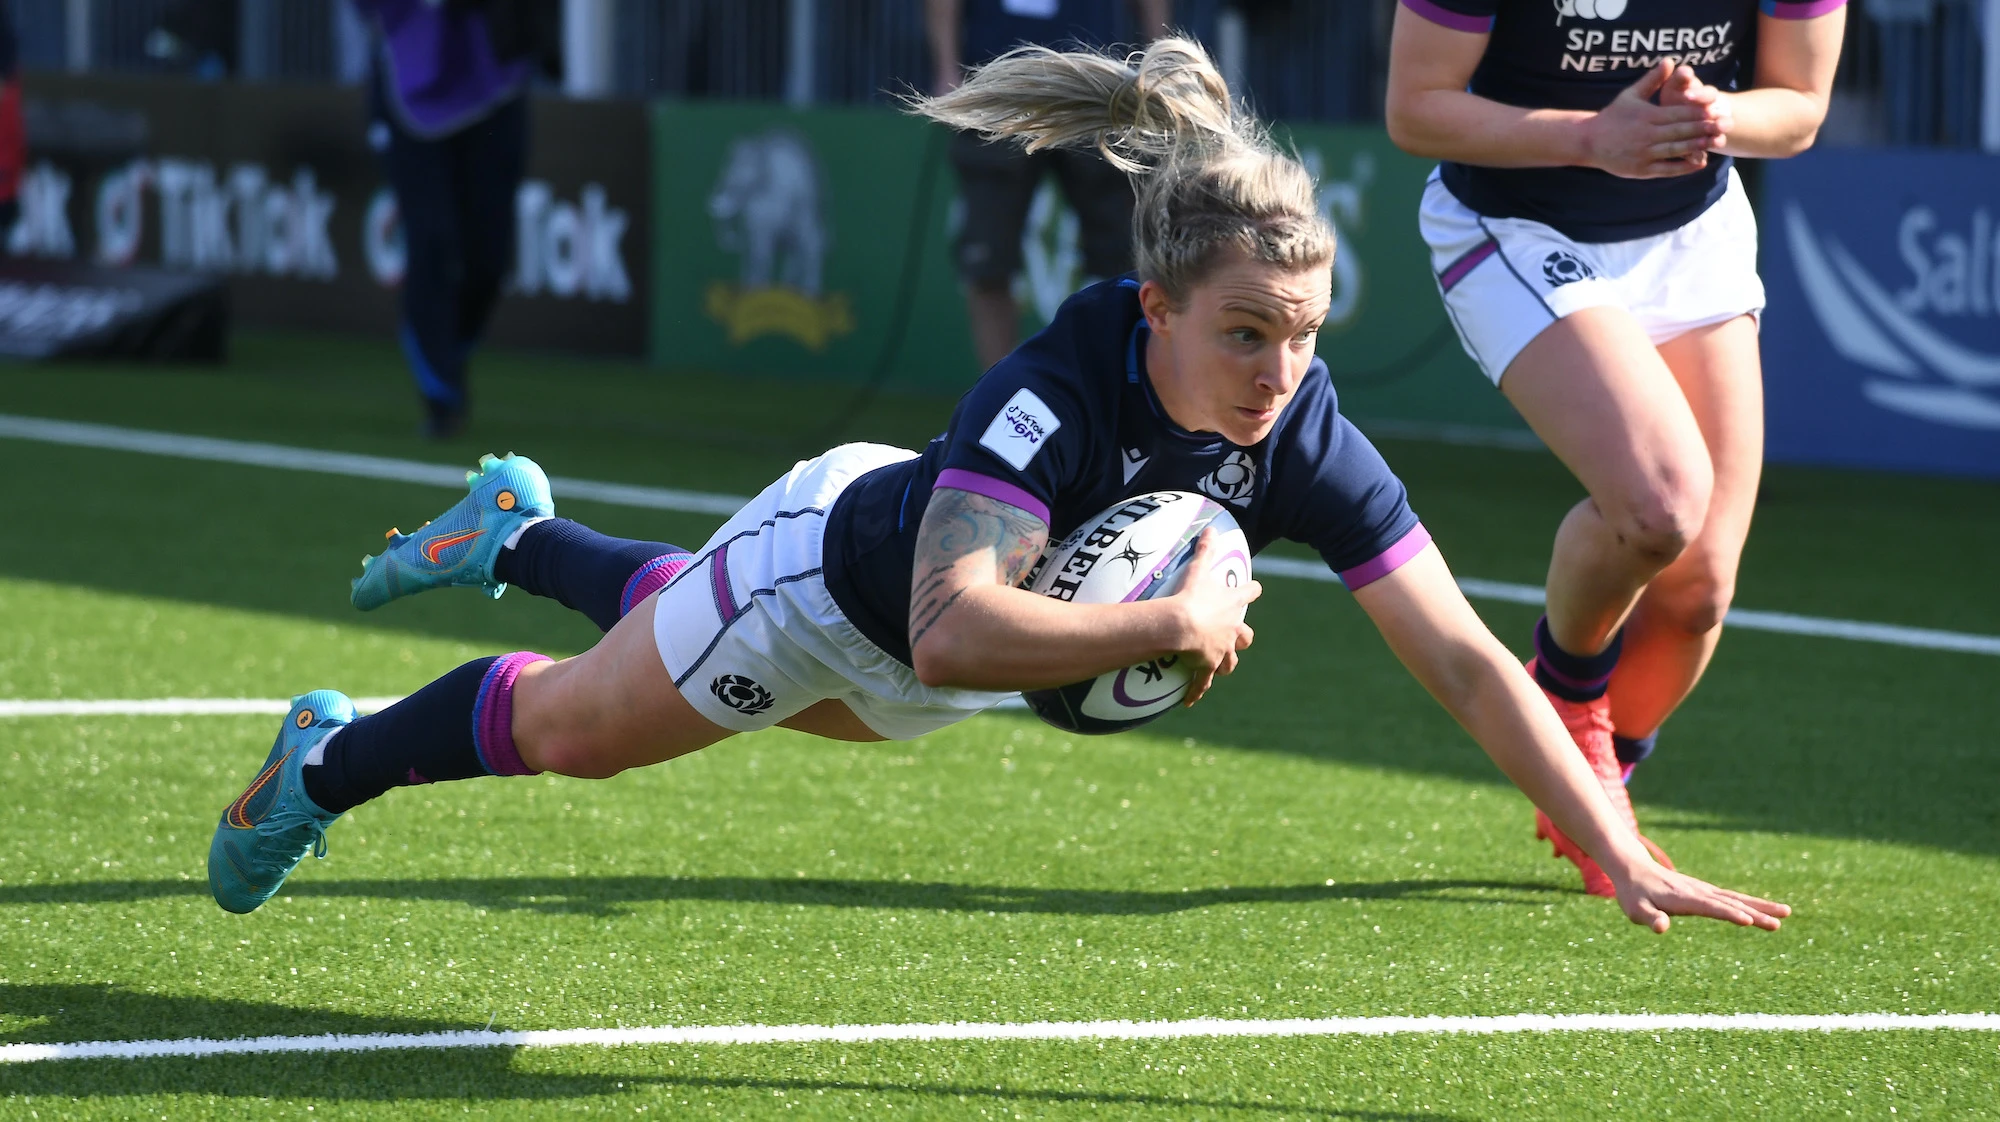 Chloe Rollie scores a try